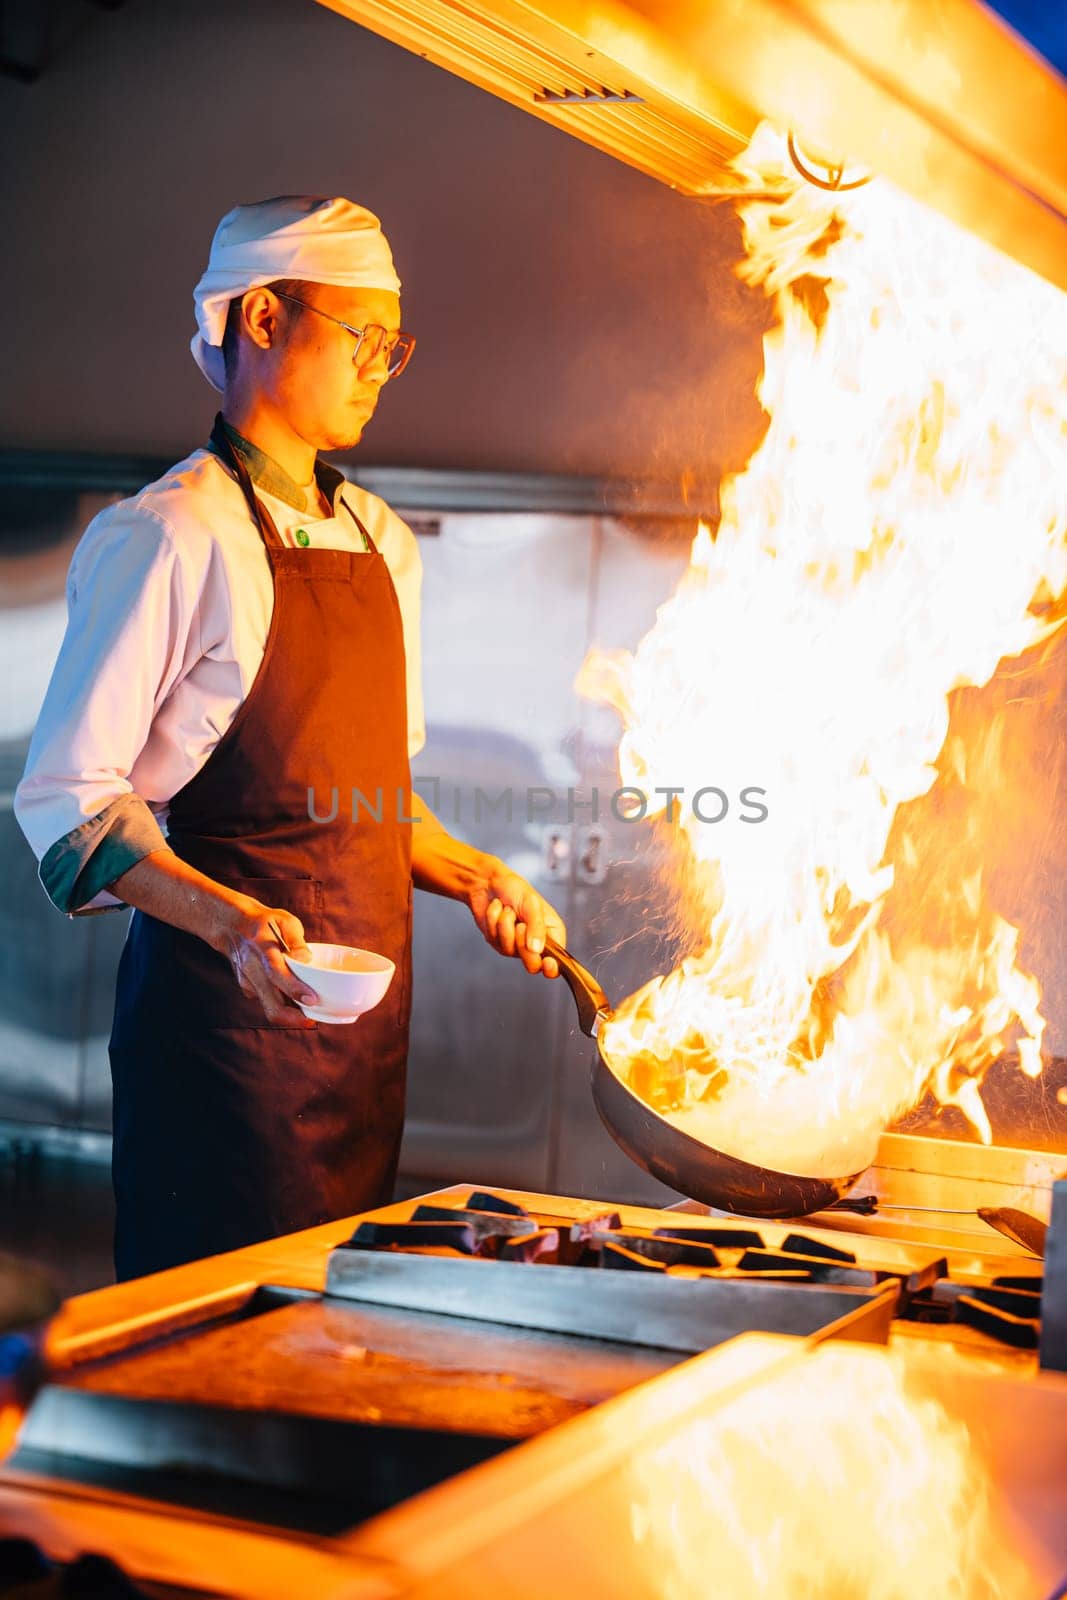 Chef hands with wok and fire. Closeup of chef cooking food with flames in professional kitchen. Expertise at work busy cooking handling flames in a modern setting. cook food with fire